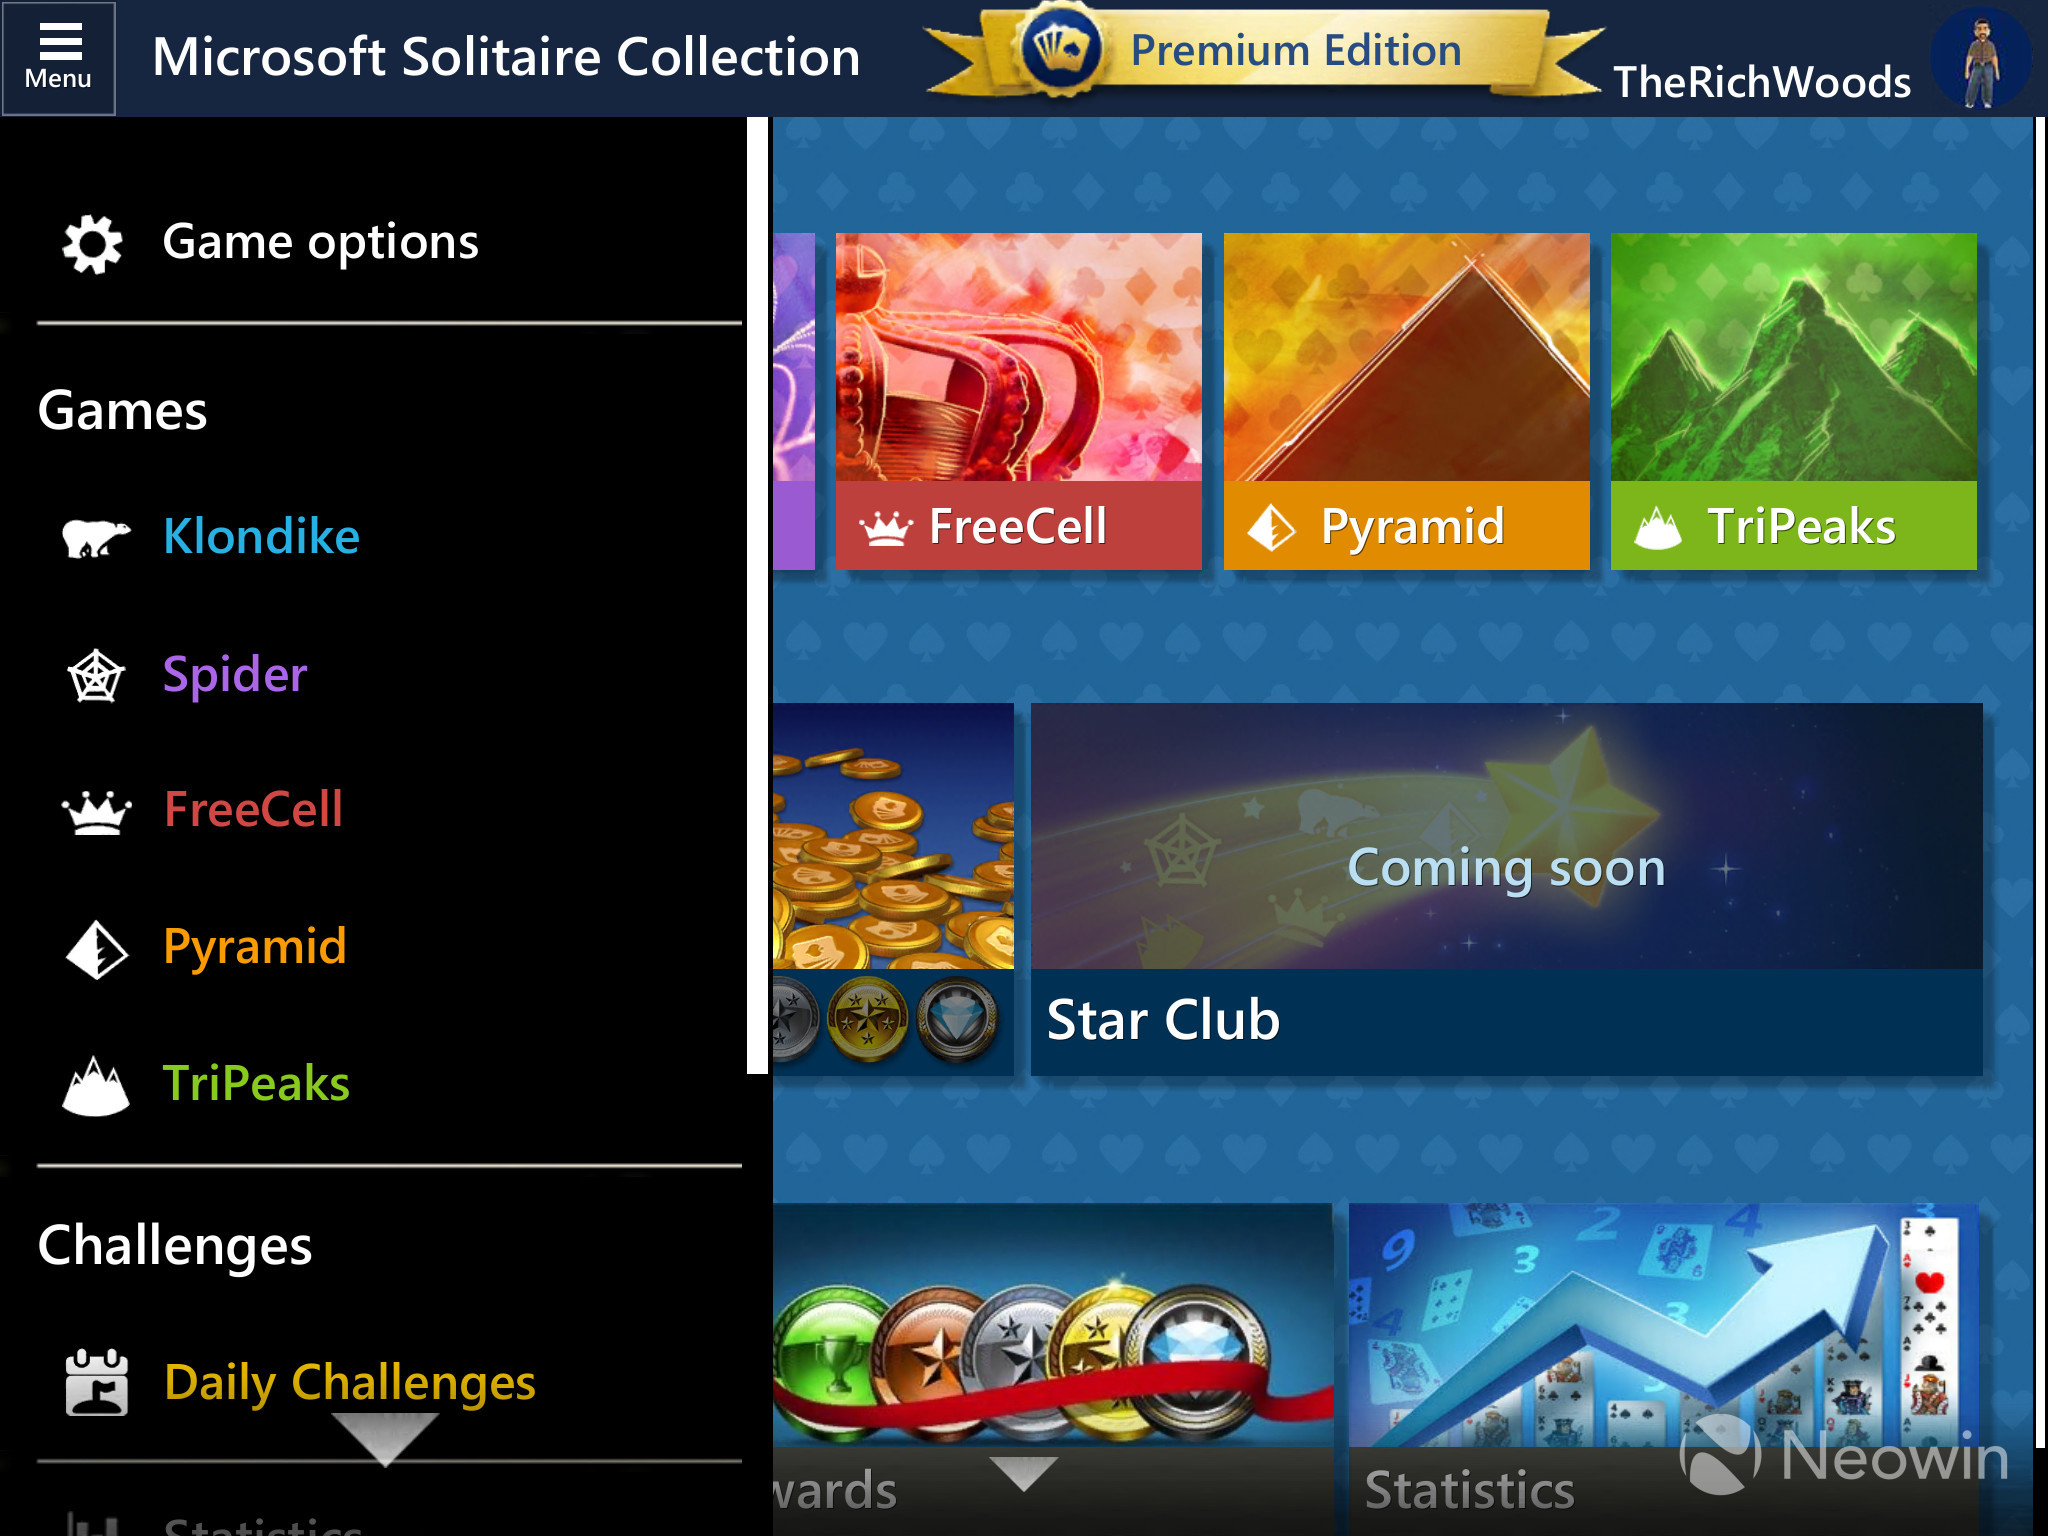 Microsoft Solitaire Collection - Play Microsoft Solitaire Collection on